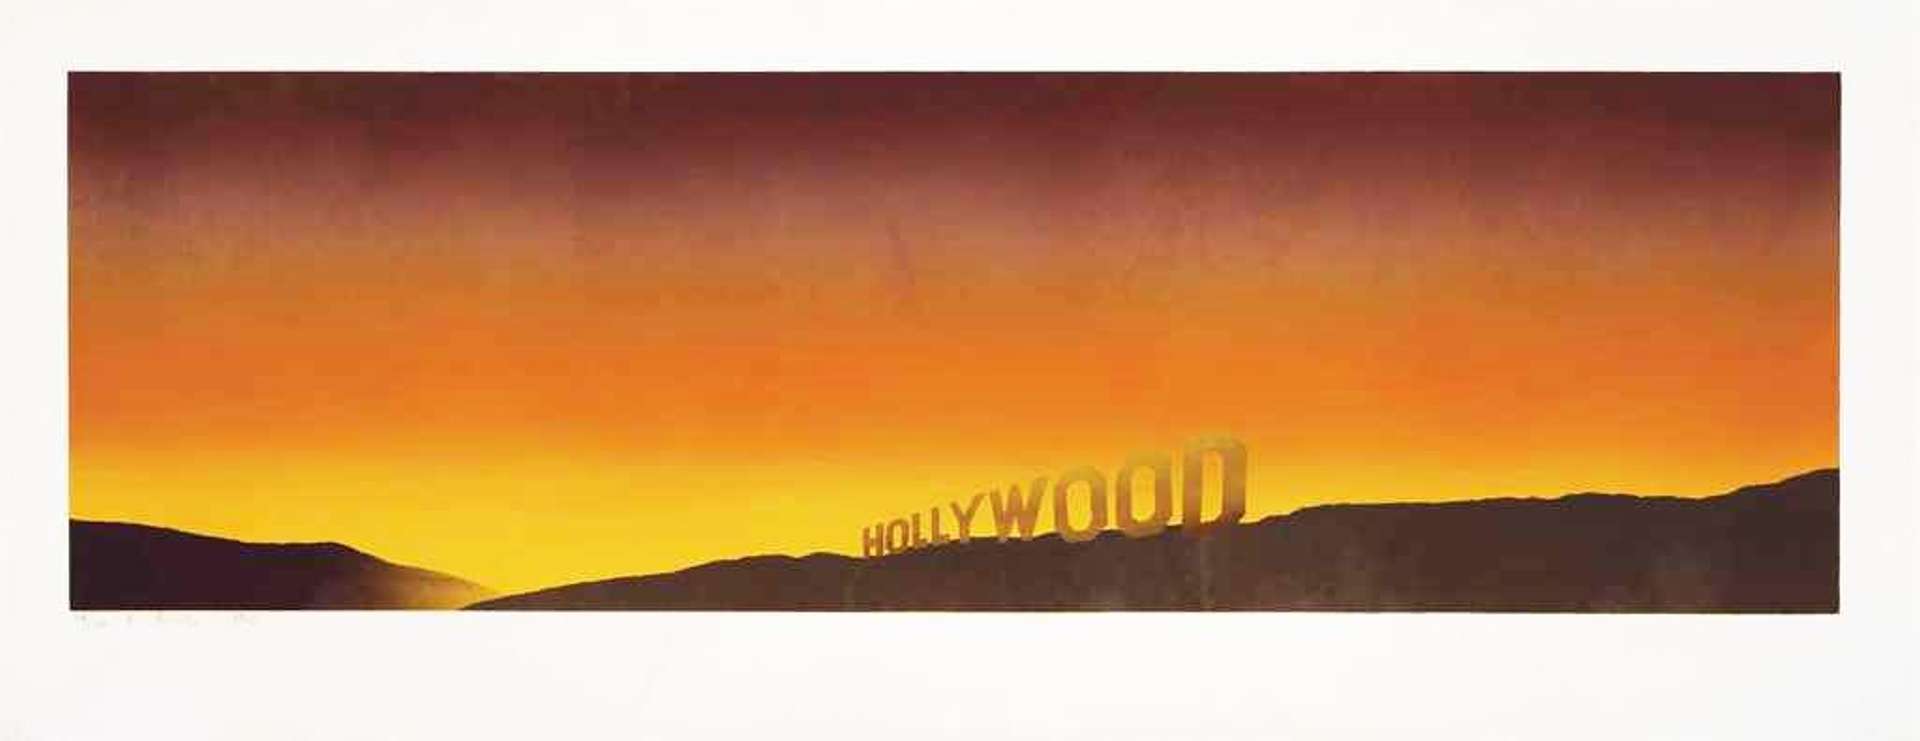 The hollywood sign with a vibrant sunset in the background